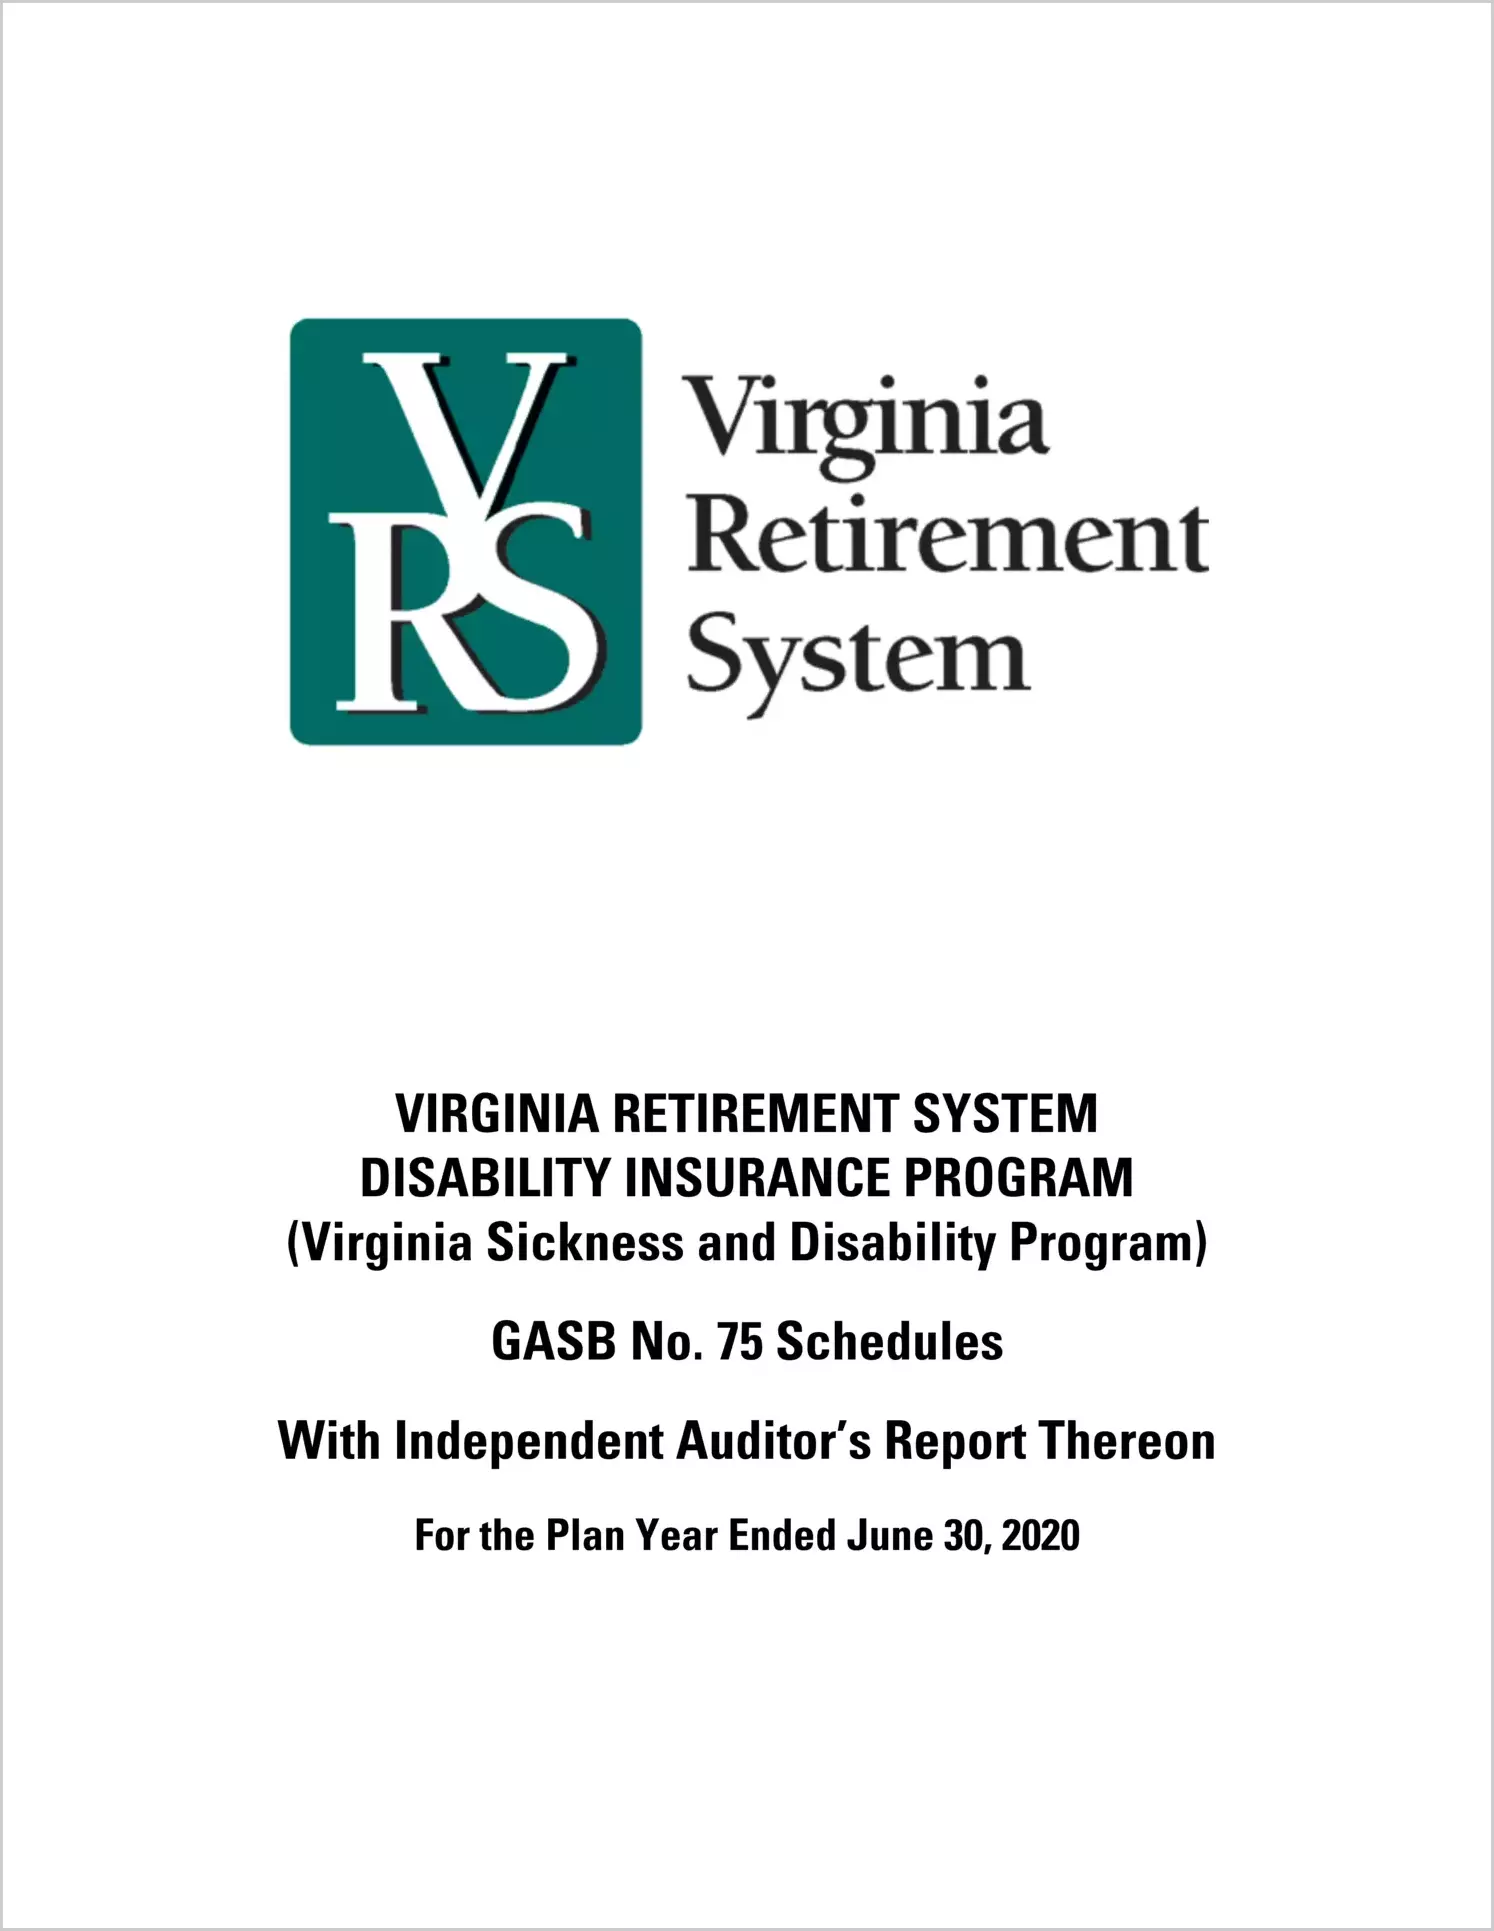 GASB 75 Schedules - Virginia Retirement System Disability Insurance Program (Virginia Sickness and Disability Program) for the year ended June 30, 2020